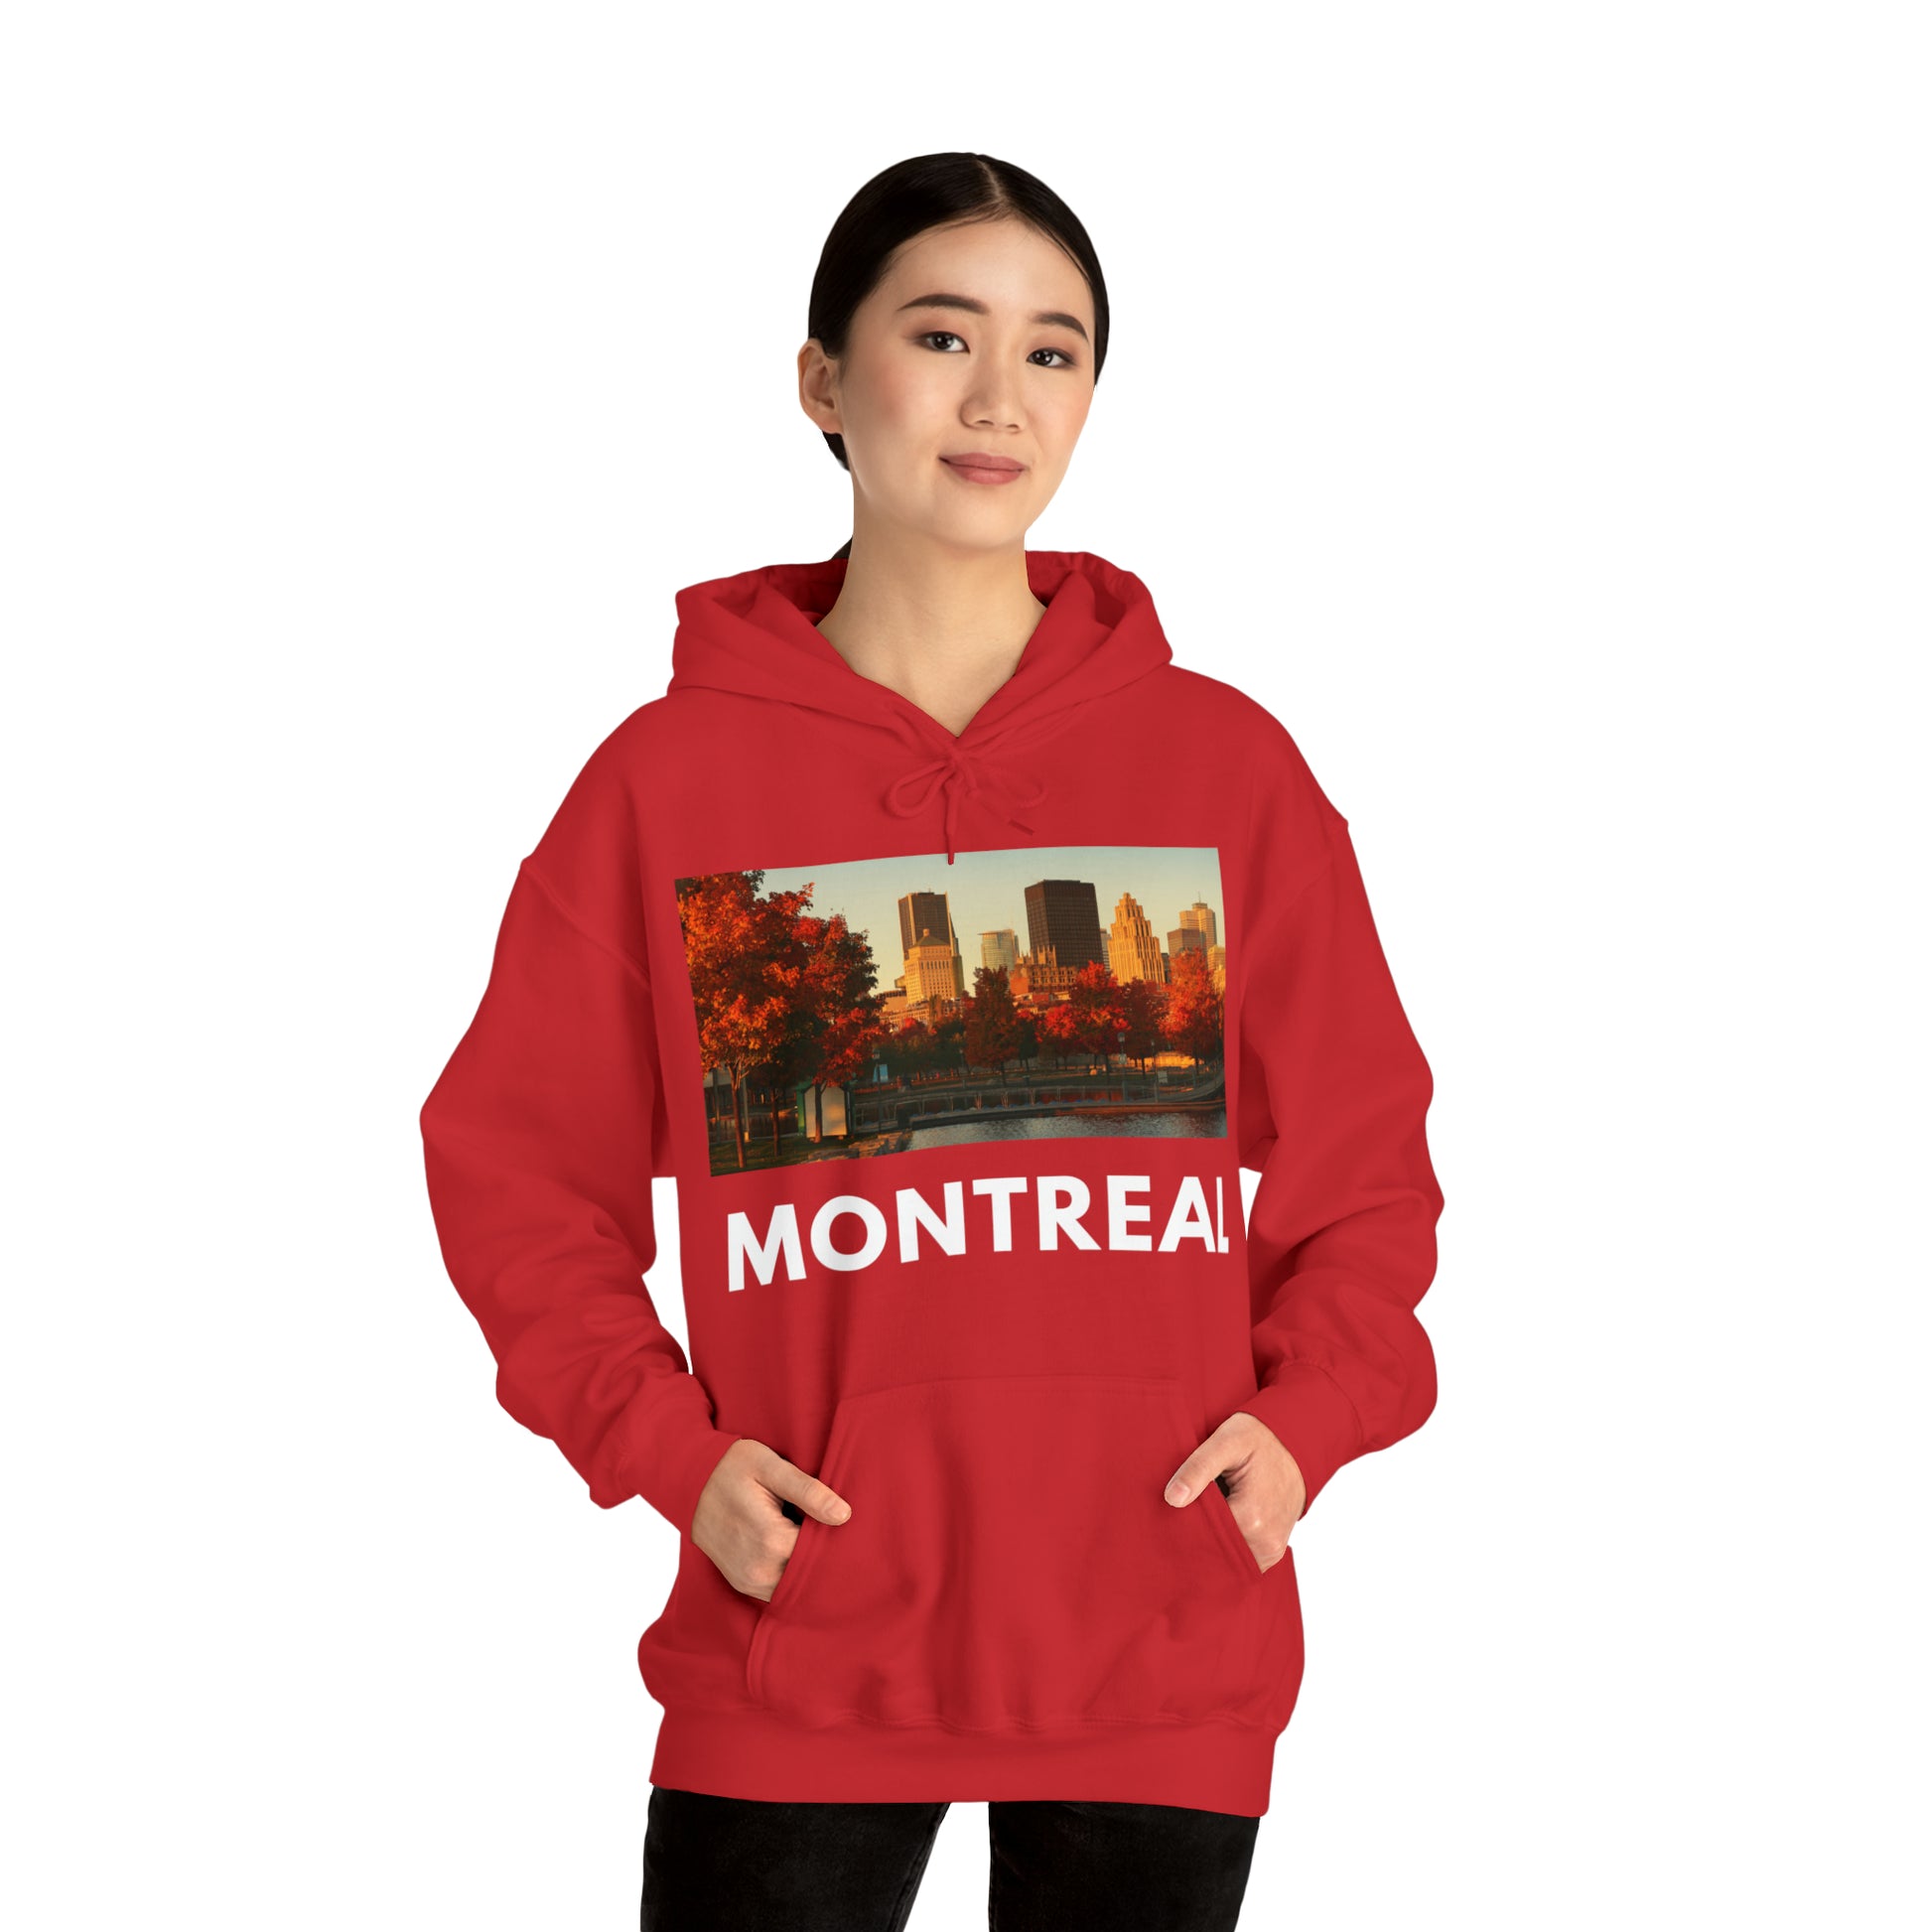   Montreal Hoodie: The Fall from HoodySZN.com